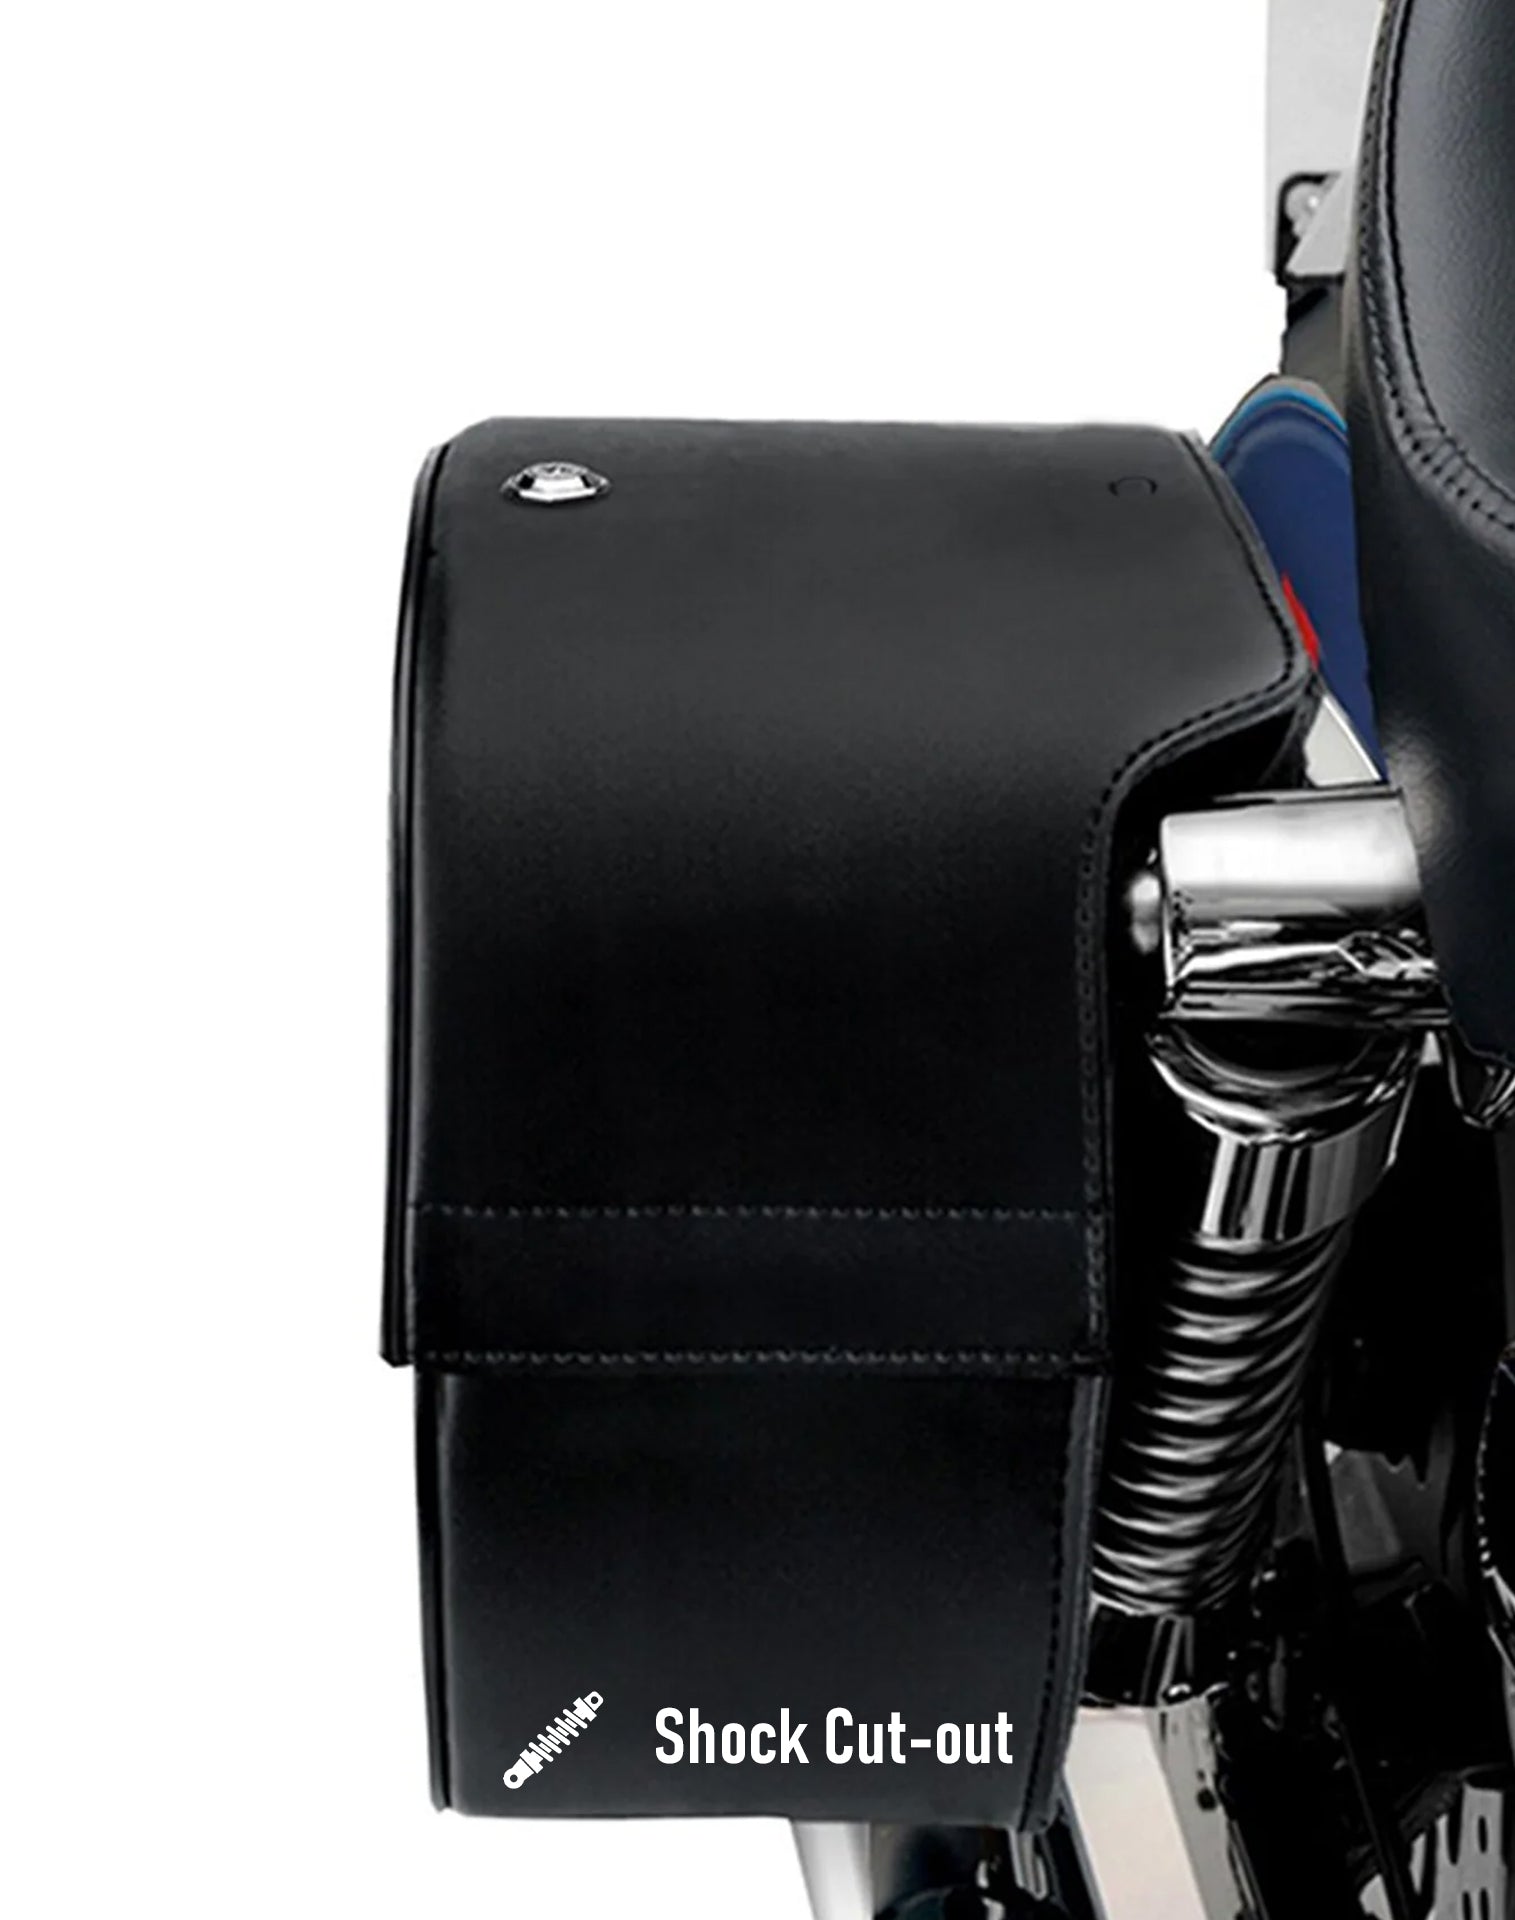 26L - Panzer Large Shock Cutout Leather Saddlebags for Harley Sportster 1200 Custom XL1200C/XLH1200C